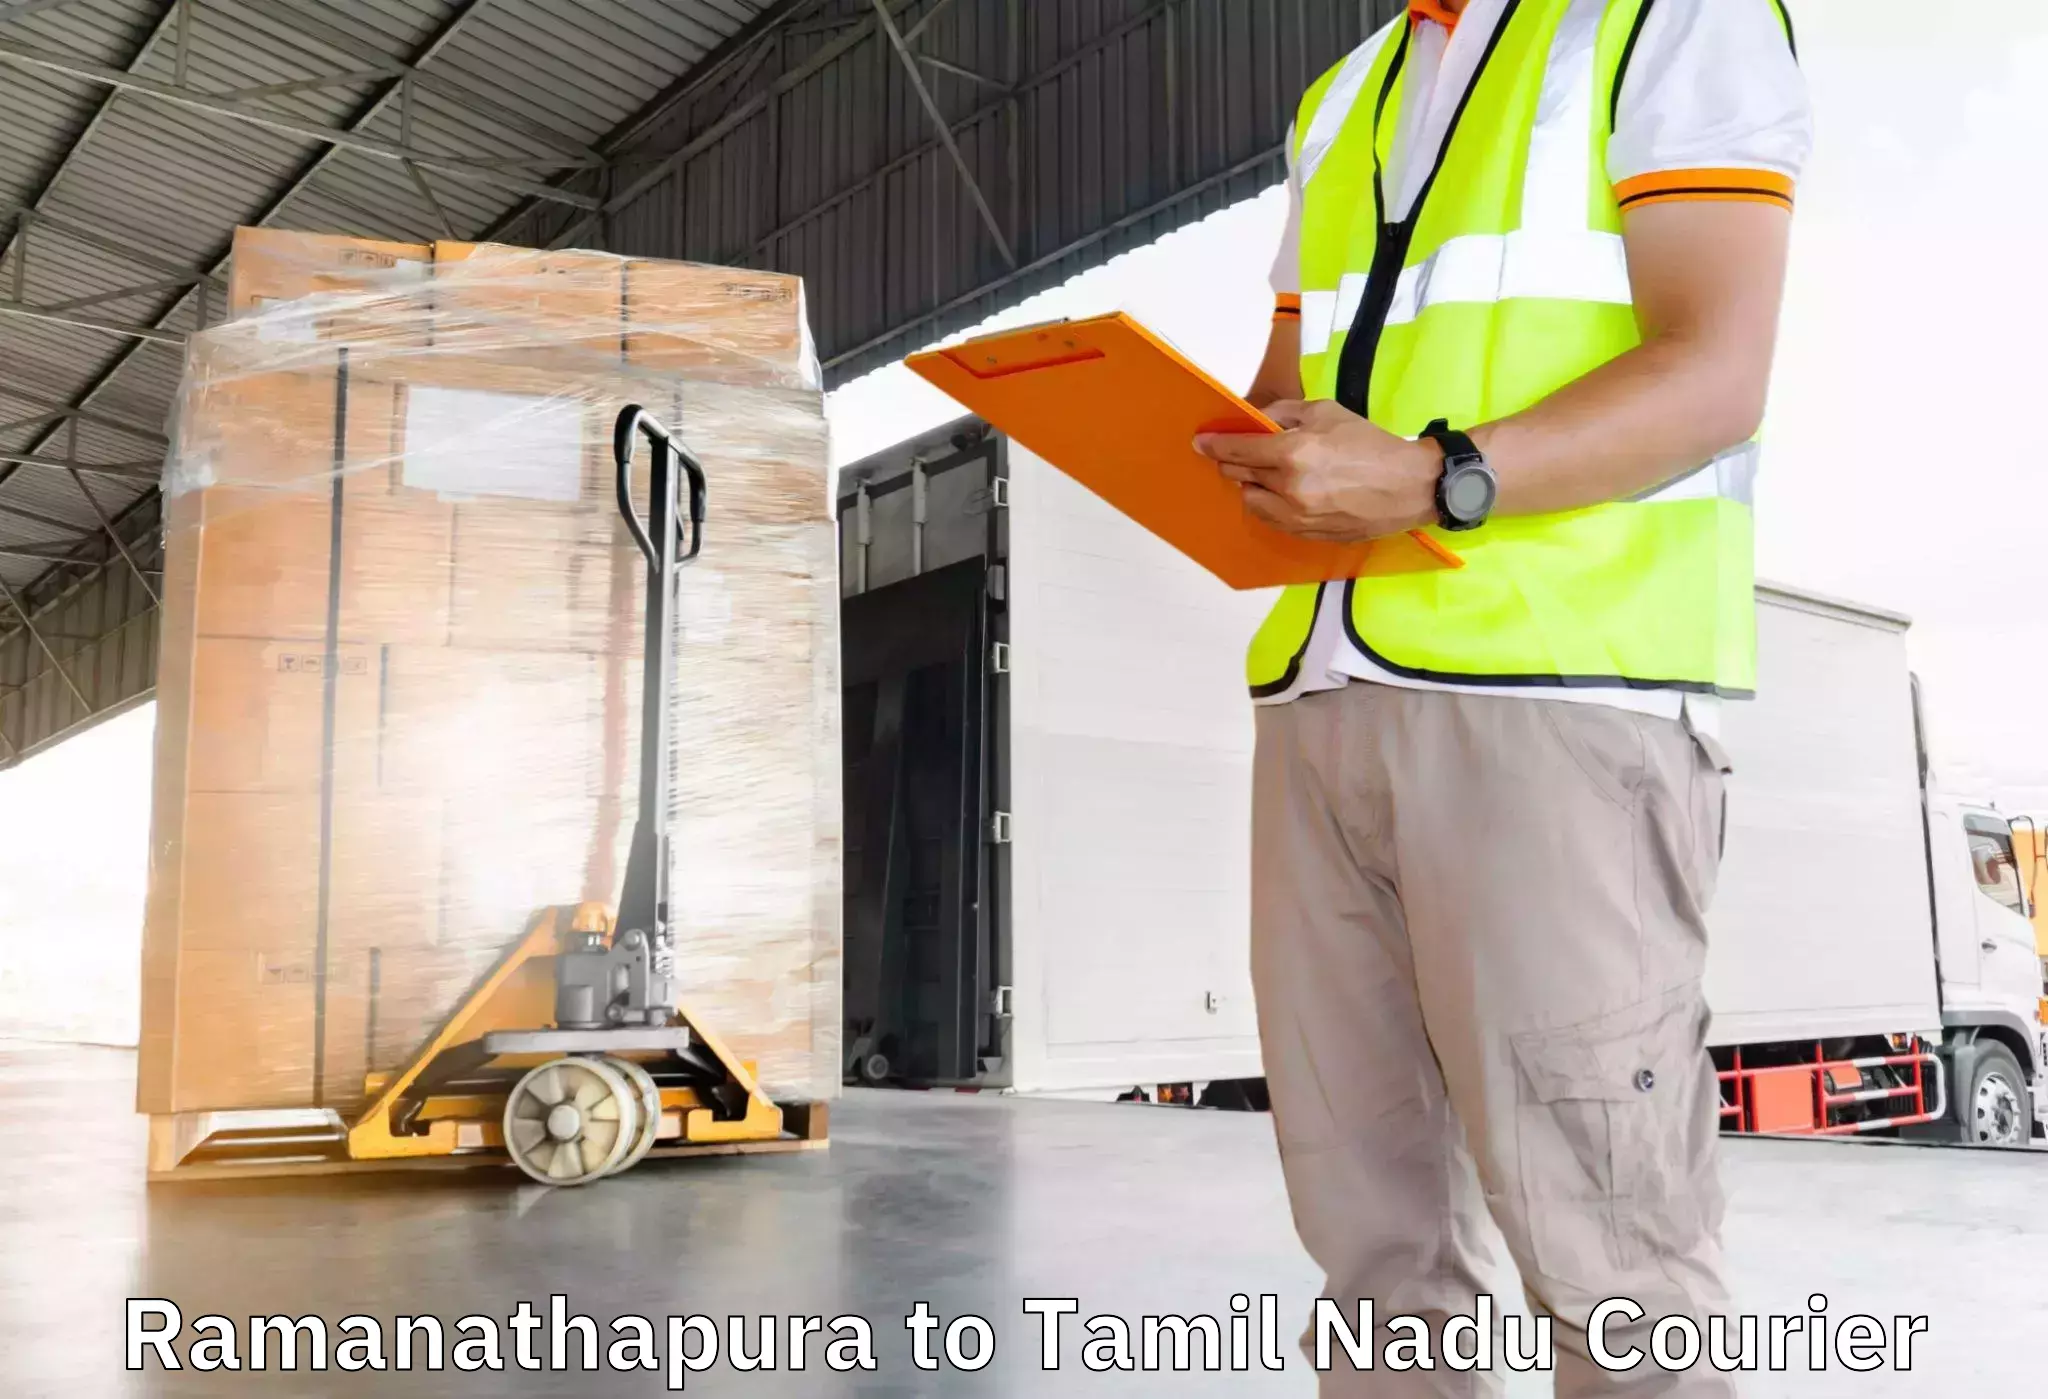 Quality moving and storage Ramanathapura to Coonoor